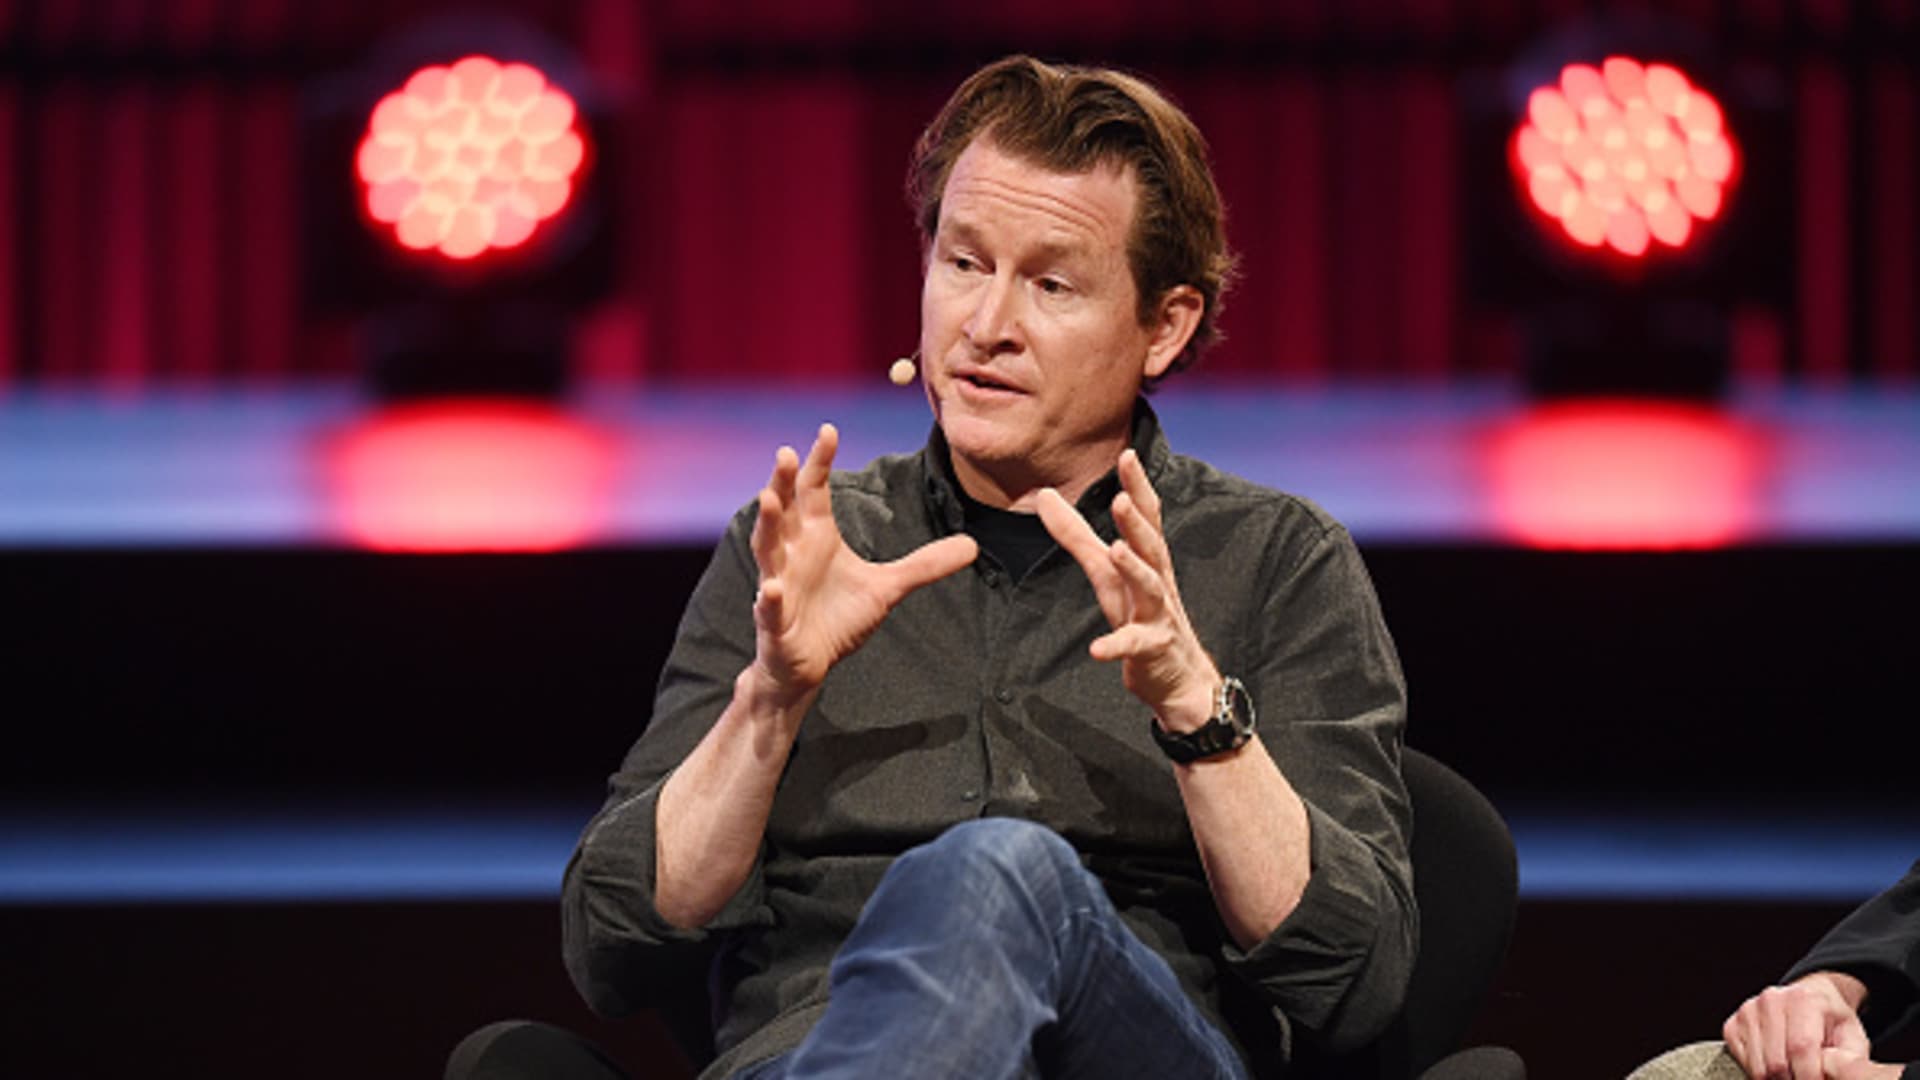 Ryan Gellert, now the CEO of Patagonia, speaking at the Copenhagen Fashion Summit 2019 at DR Koncerthuset on May 16, 2019 in Copenhagen, Denmark.